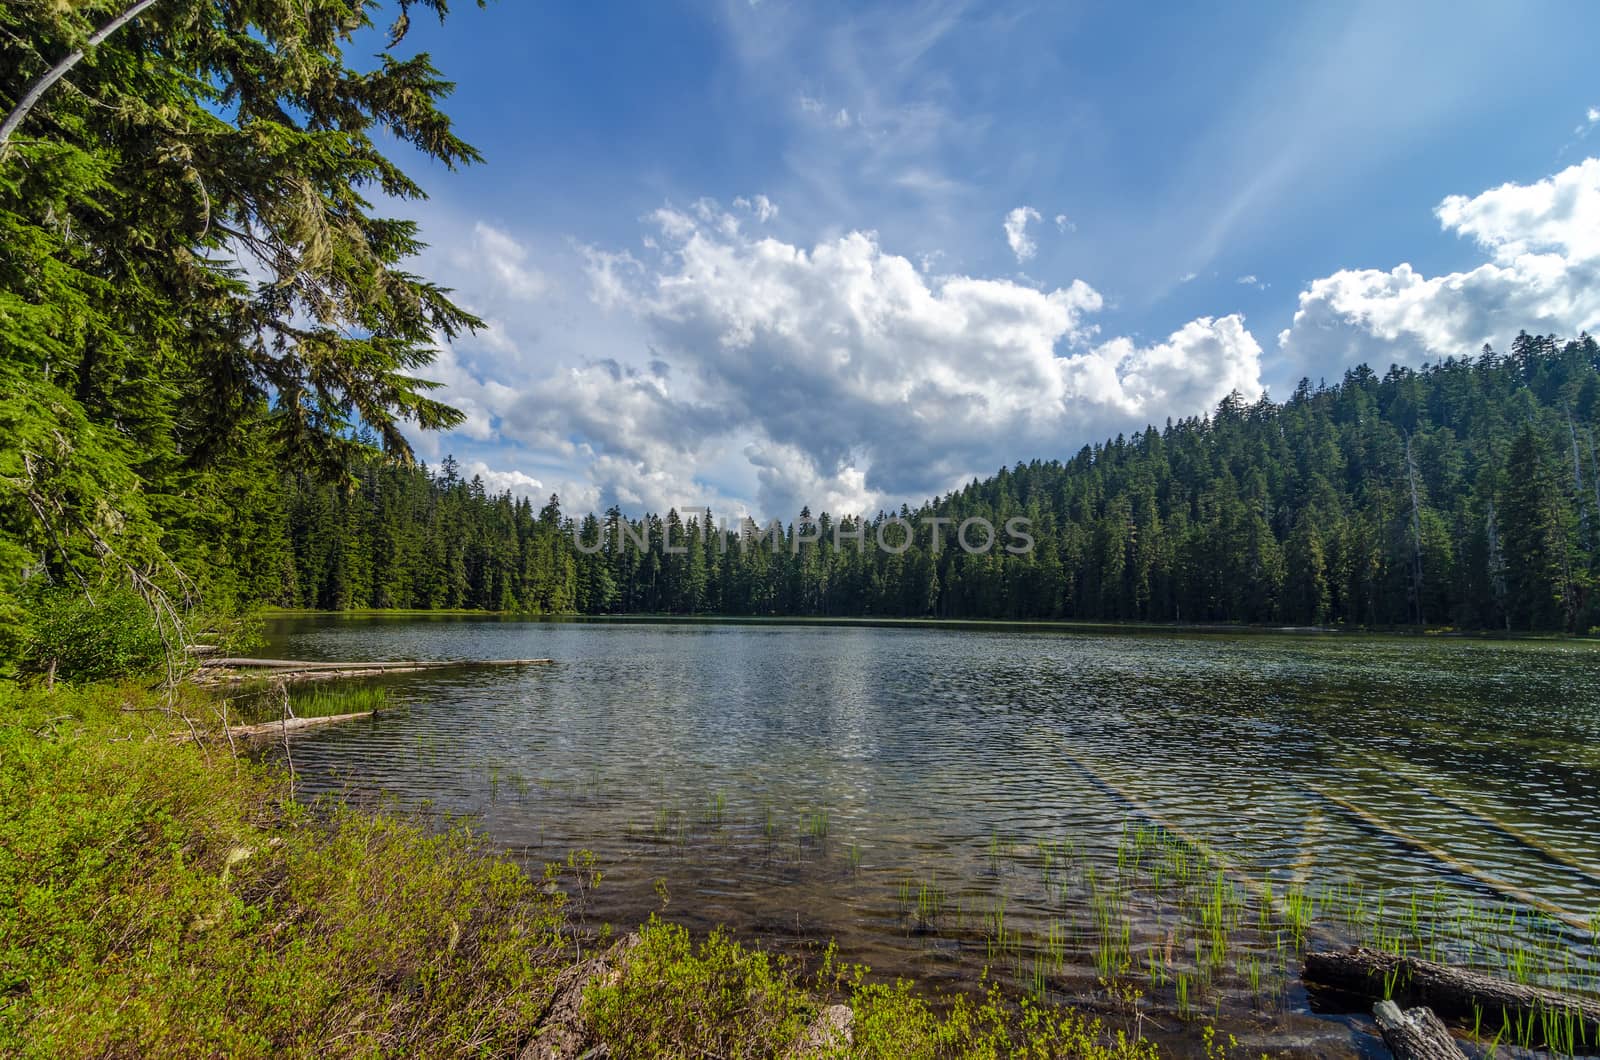 Upper Twin Lake in the Mt. Hood National Forest